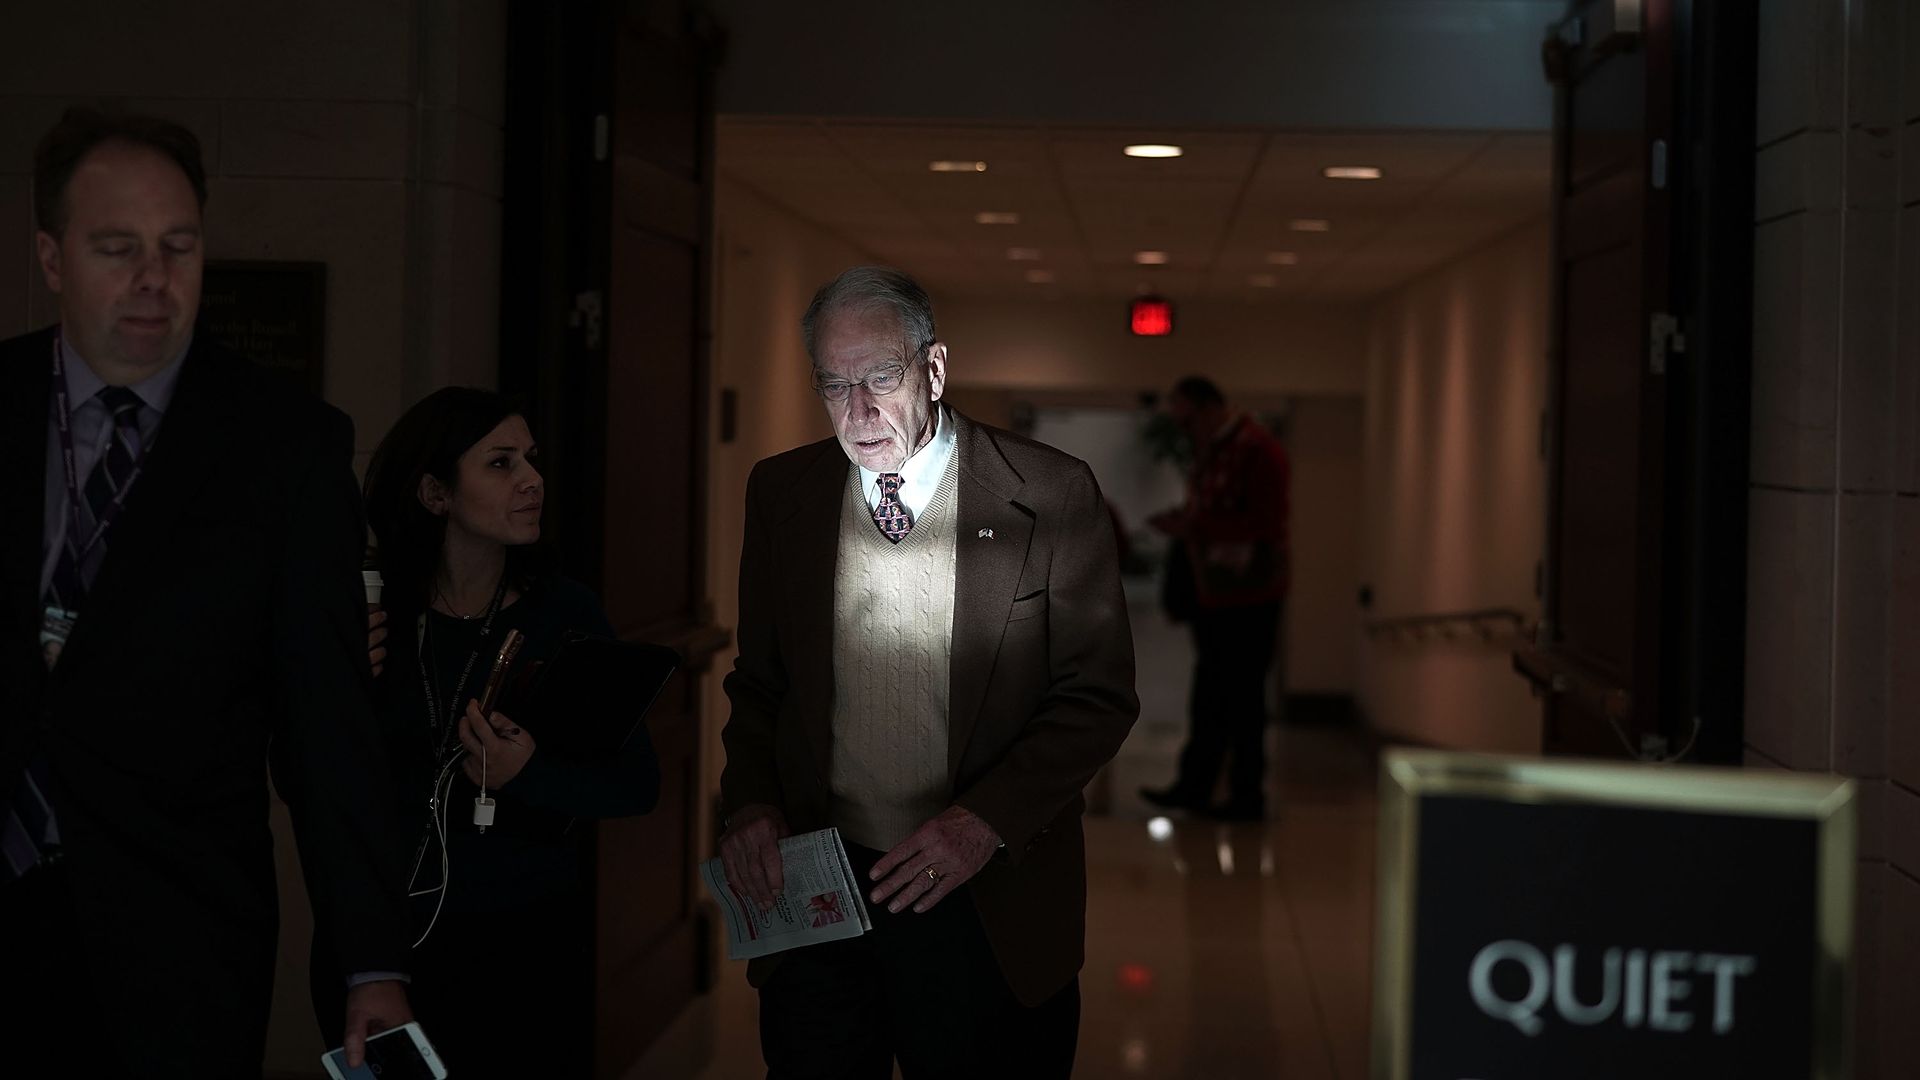 Chuck Grassley is illuminated by a light in a dark hallway at the Capitol